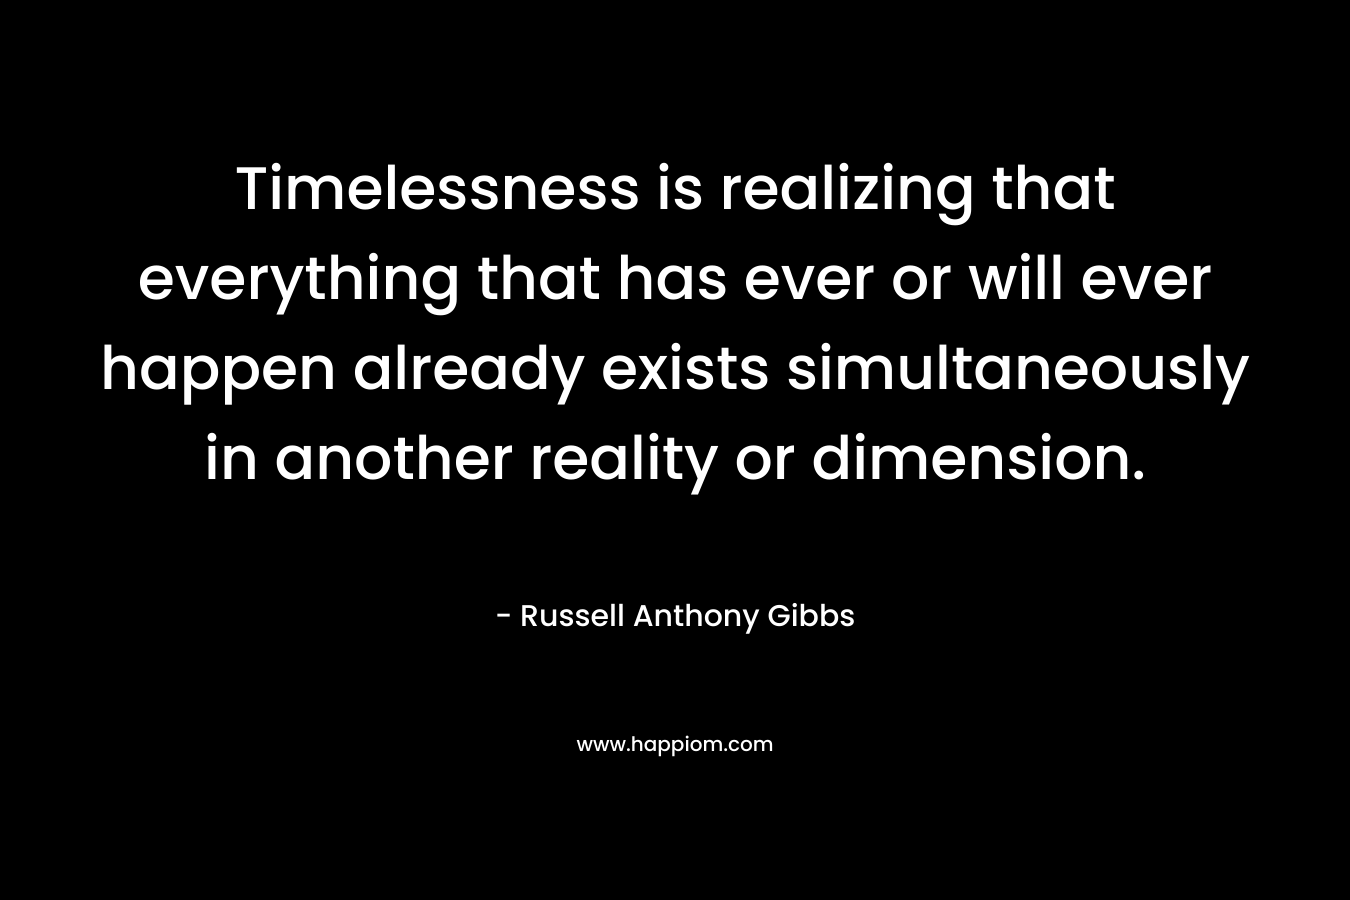 Timelessness is realizing that everything that has ever or will ever happen already exists simultaneously in another reality or dimension. – Russell Anthony Gibbs